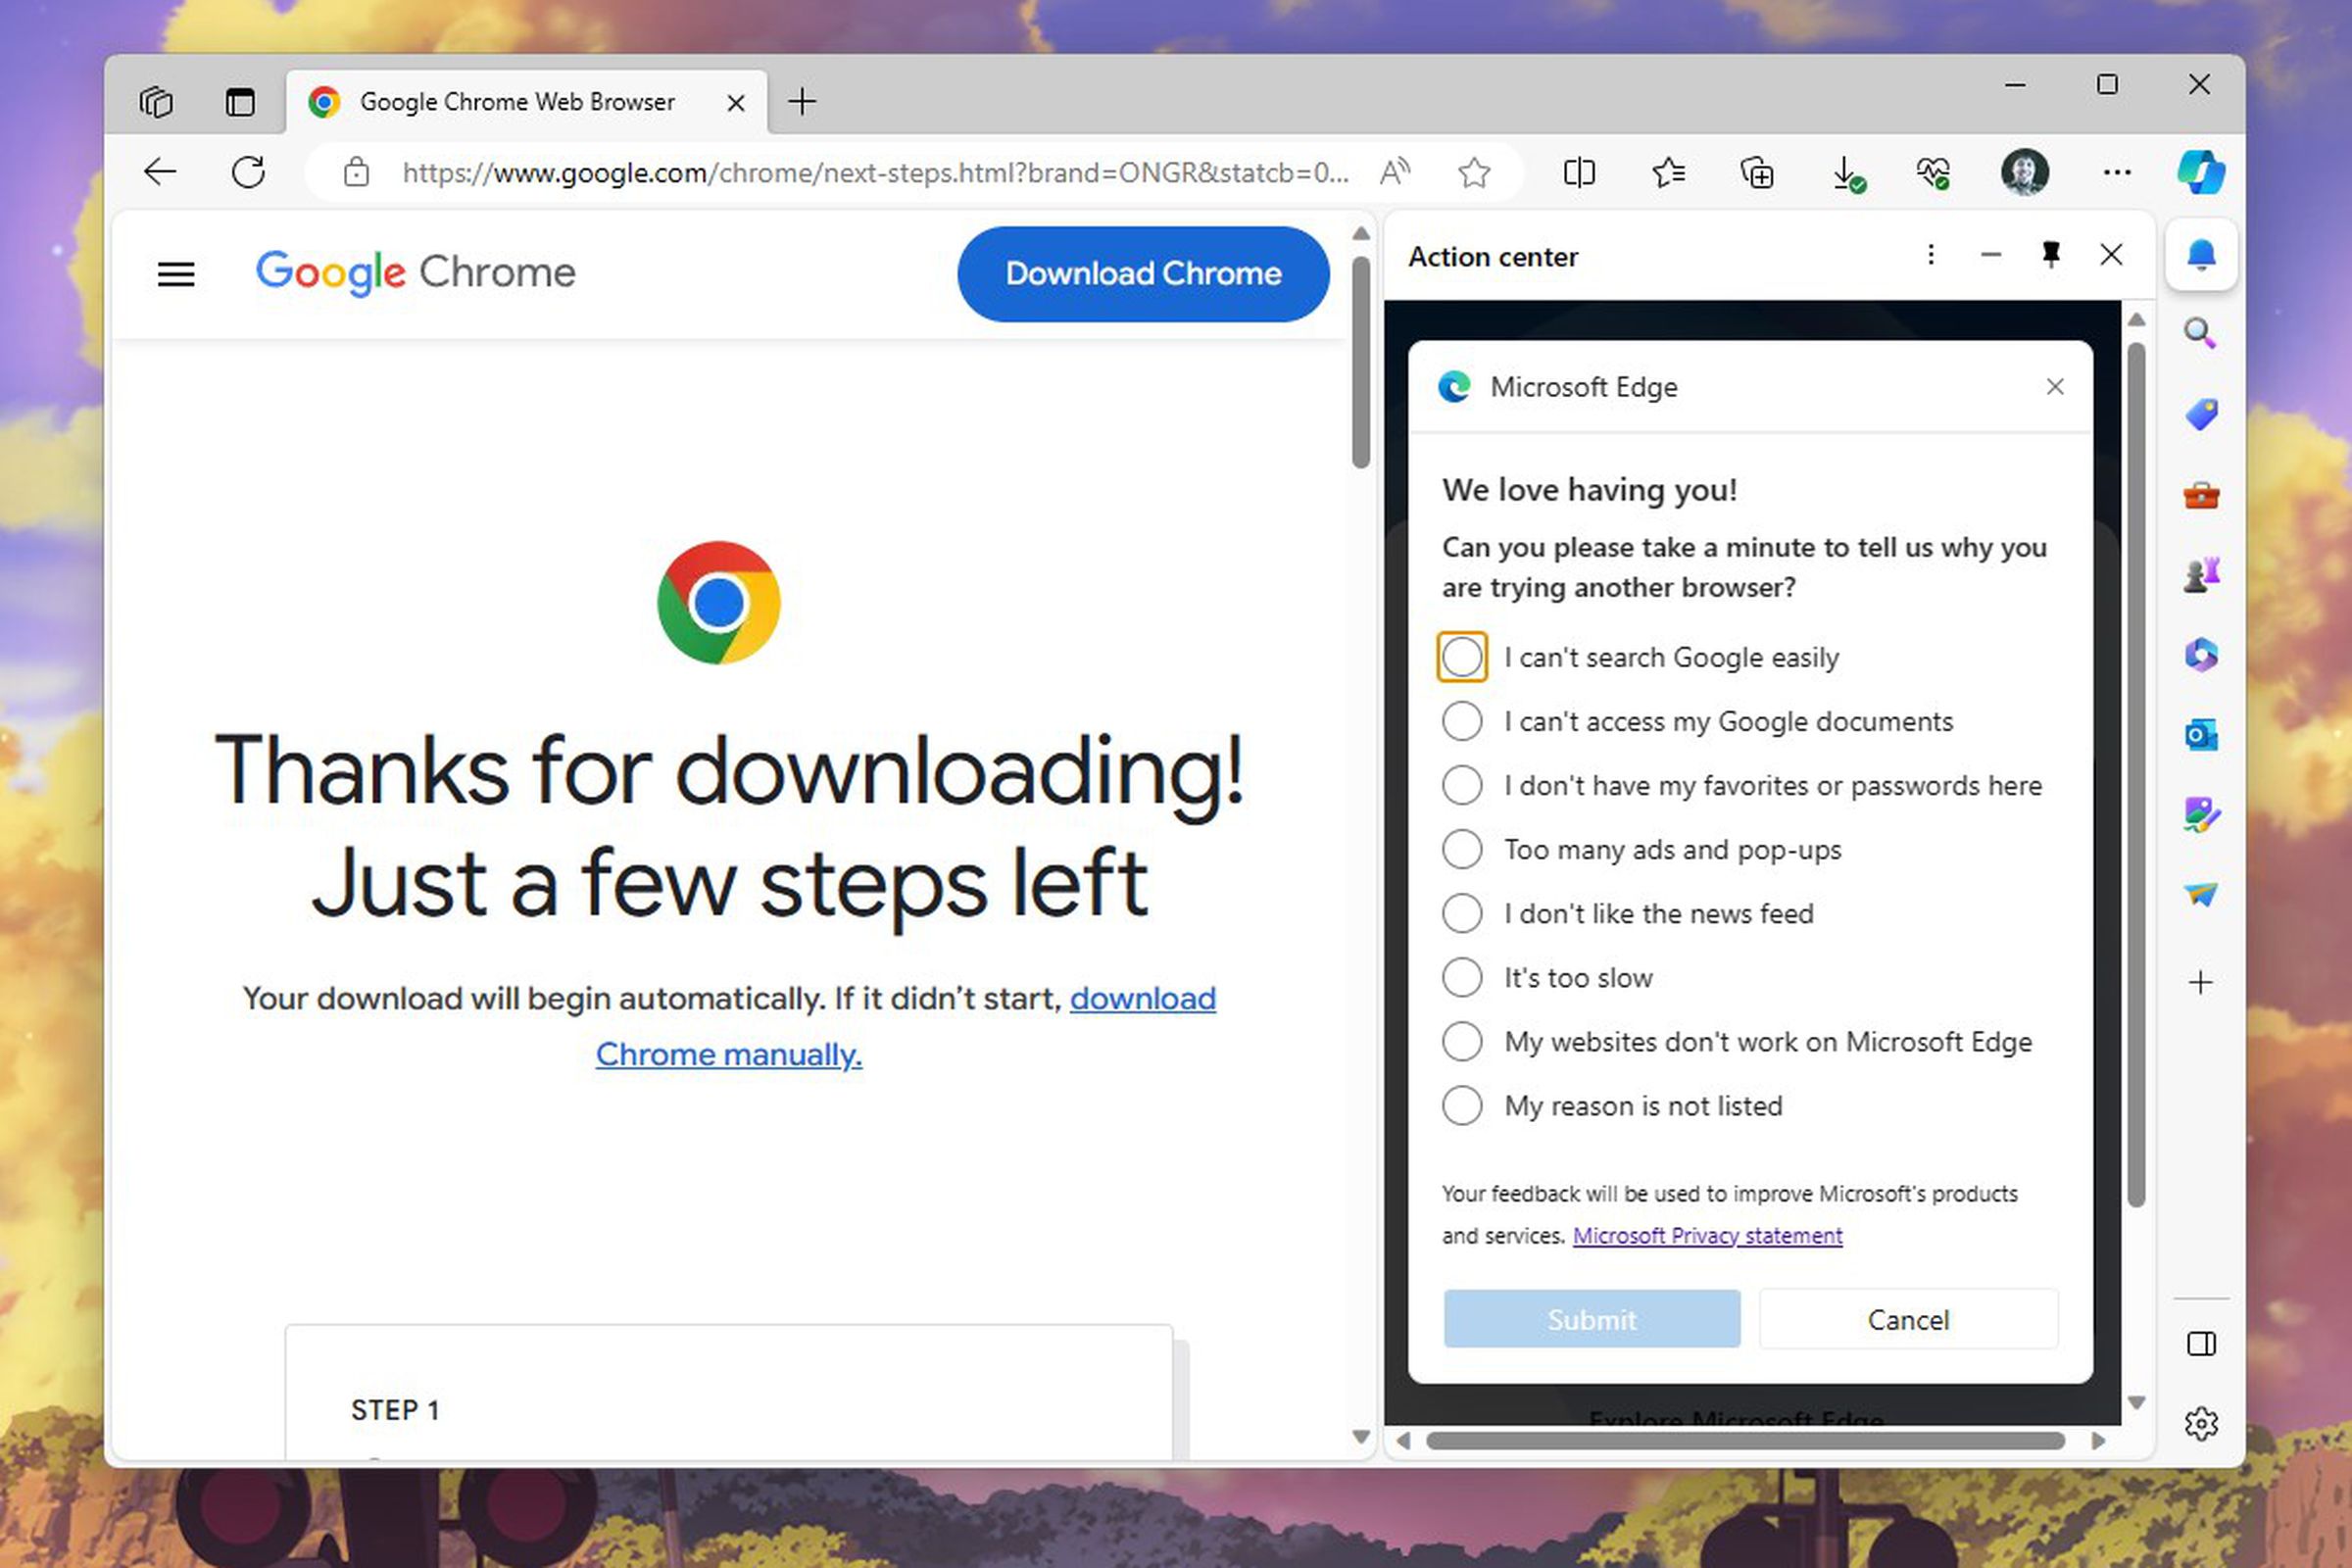 Microsoft Edge now pops up a poll after you press the “Download Chrome” button.